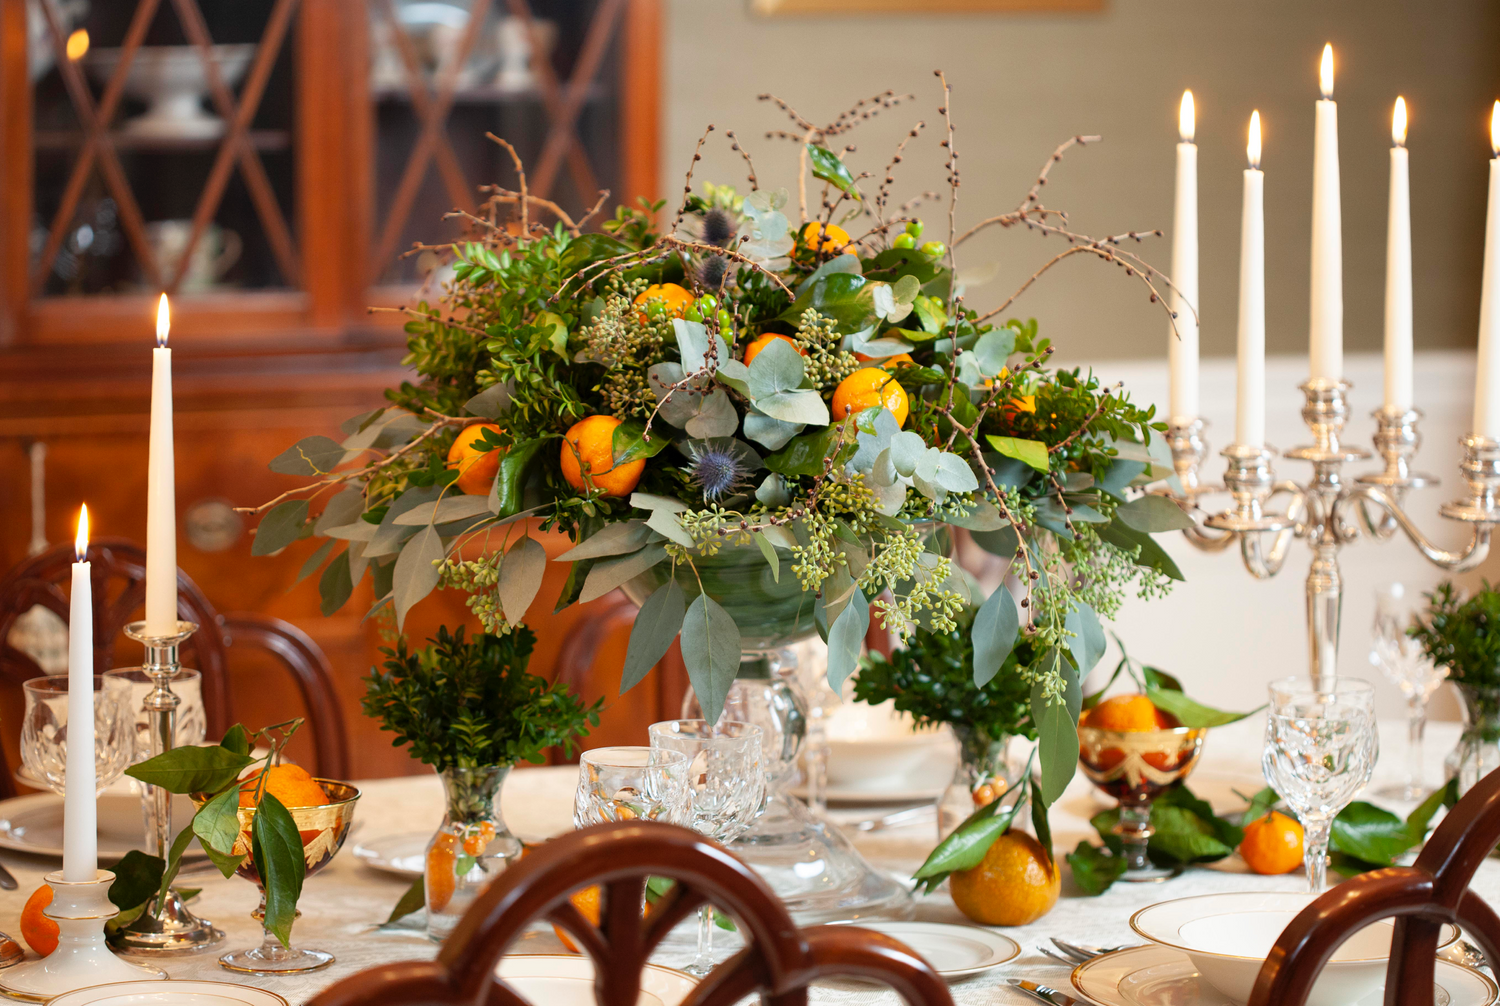 Citrus Elegance: A Sicilian-Inspired Holiday Table Setting Guide